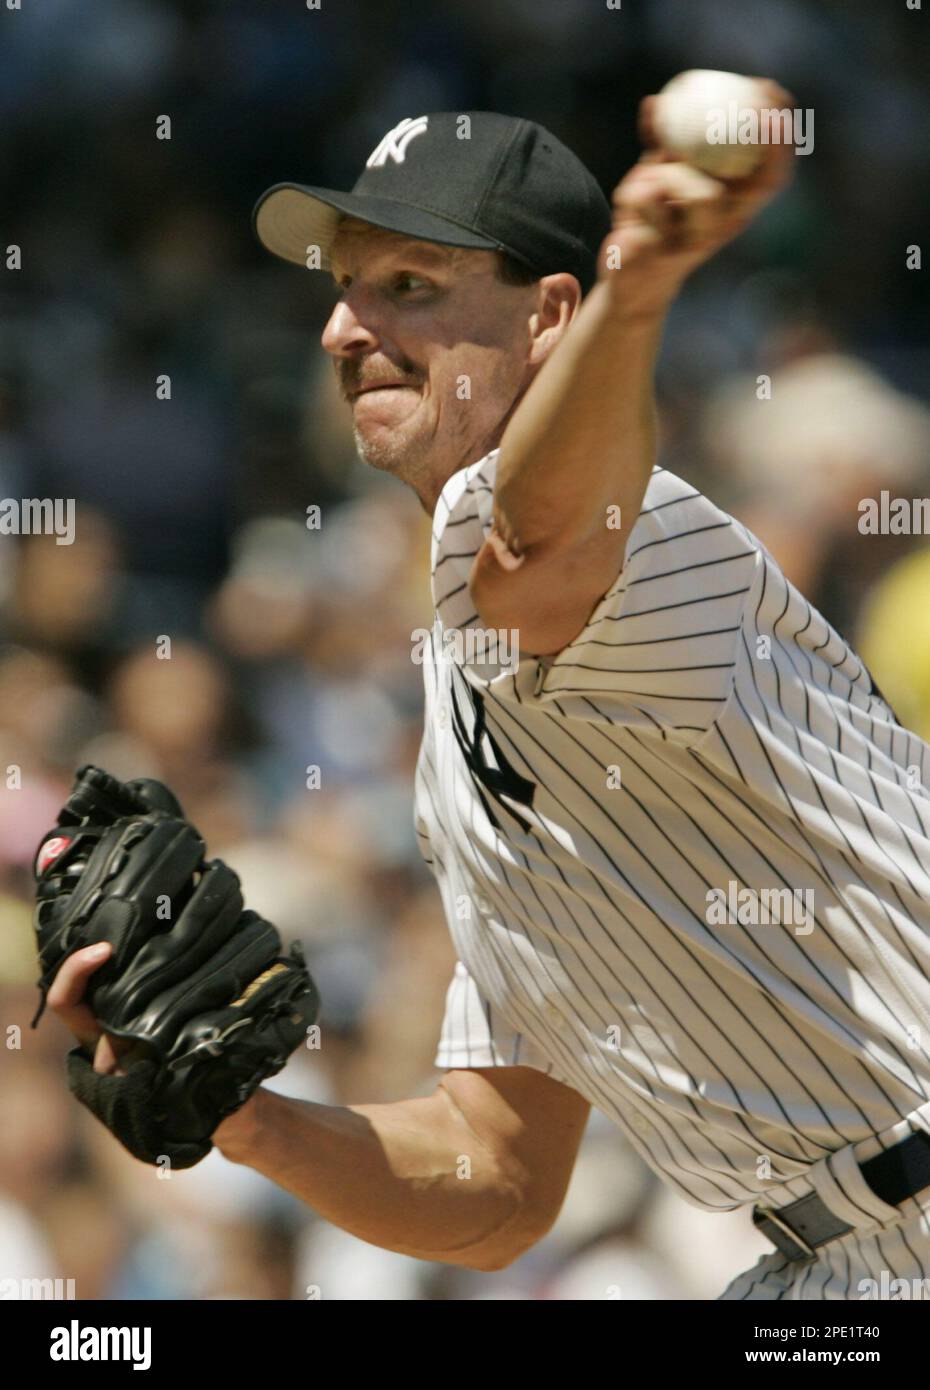 New York Yankees pitcher Randy Johnson delivers a pitch in the sixth  innning of the Yankees 9-4 victory over the Cleveland Indians, Sunday, July  10, 2005, at Yankee Stadium in New York.